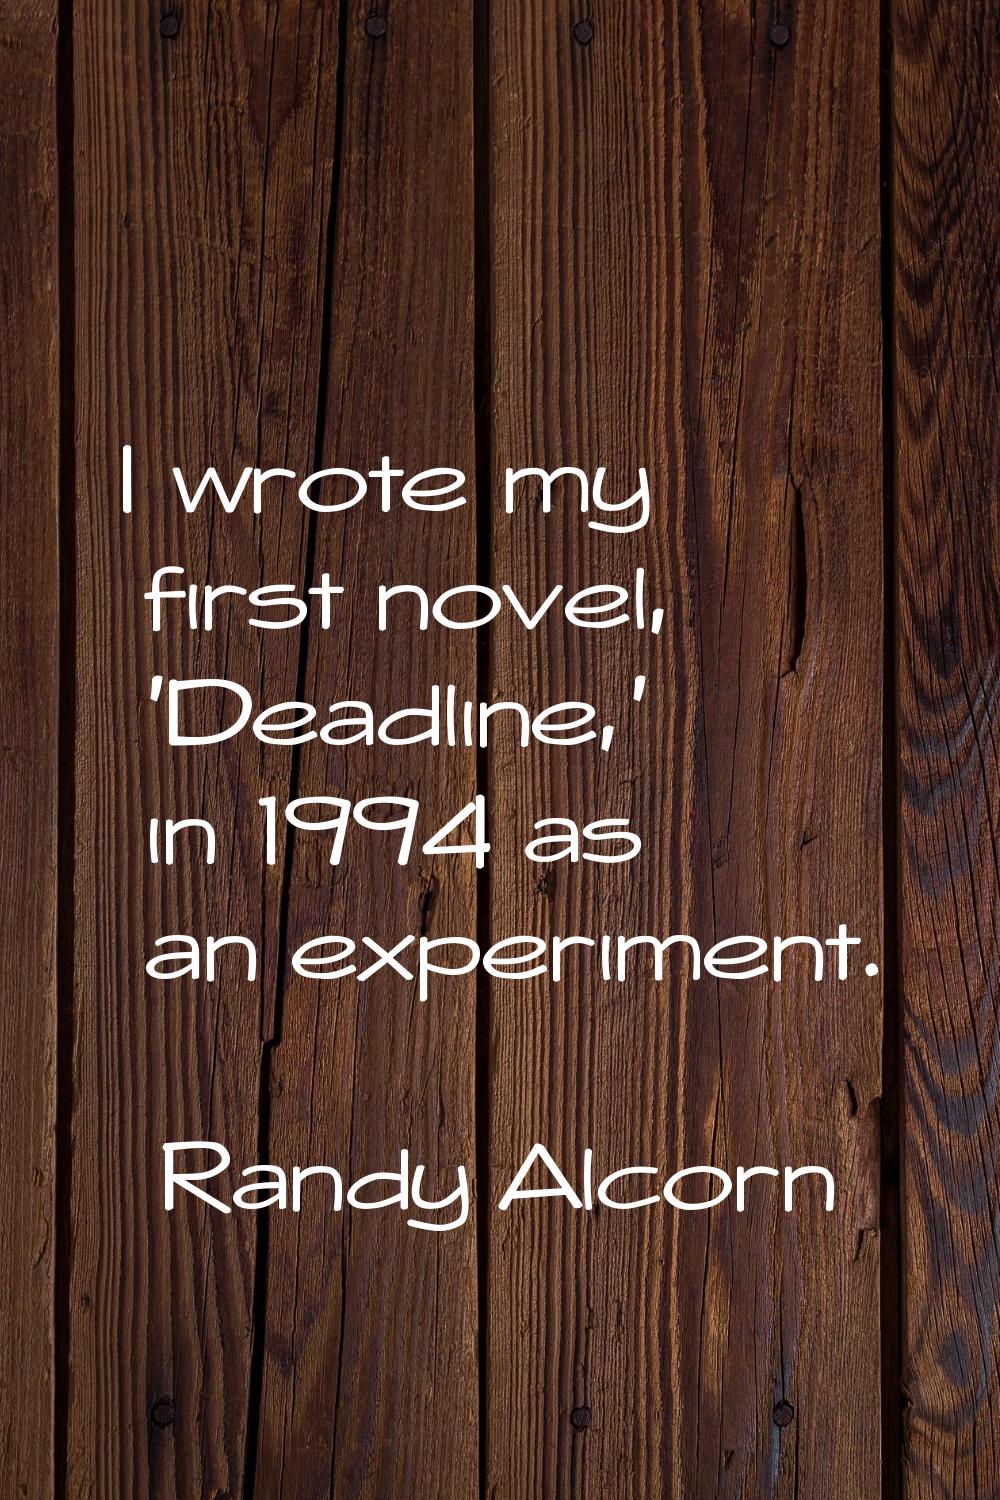 I wrote my first novel, 'Deadline,' in 1994 as an experiment.